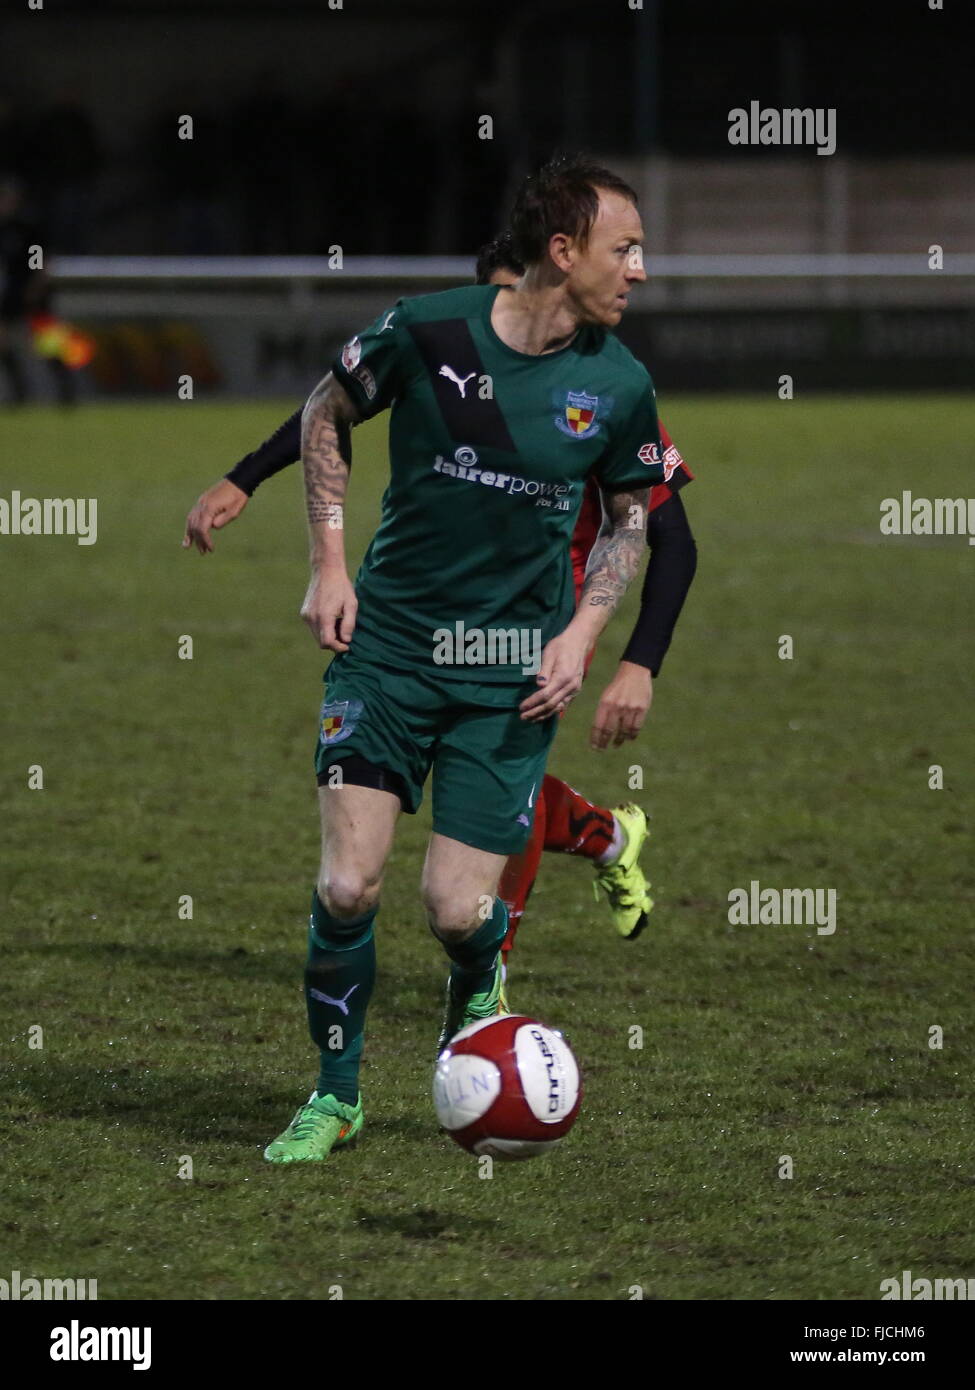 Nantwich, Cheshire, UK. 1st March, 2016. Nantwich Town striker Steve Jones on the ball during the Integro Doodson Sports Cup match between Nantwich Town and Bamber Bridge at the Weaver Stadium. Credit:  Simon Newbury/Alamy Live News Stock Photo